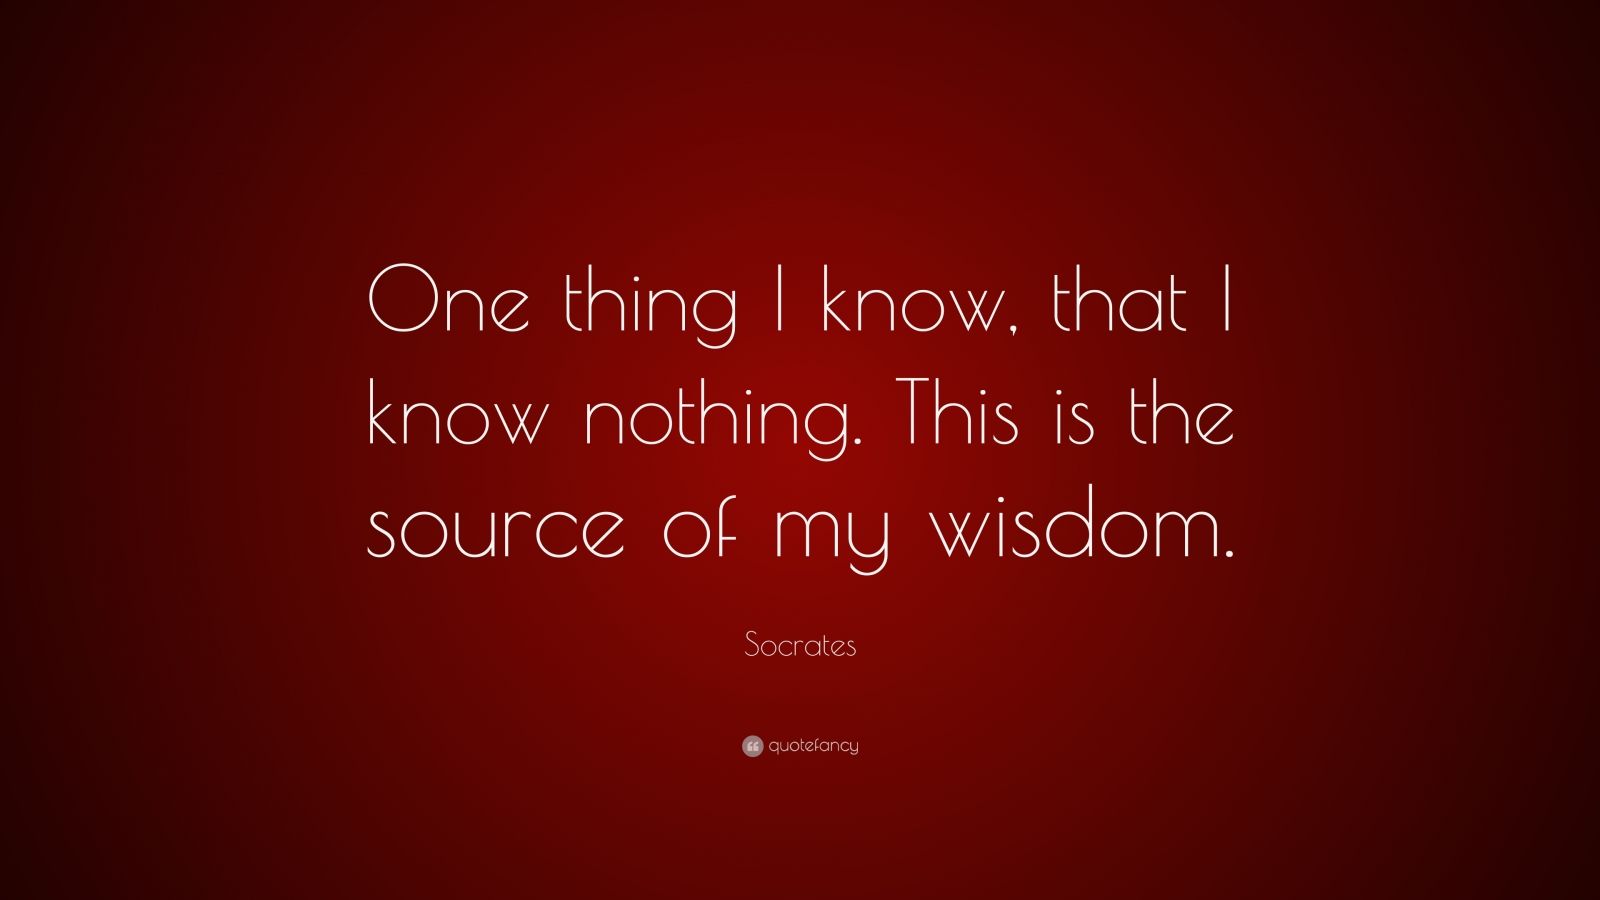 Socrates Quote: “One thing I know, that I know nothing. This is the ...